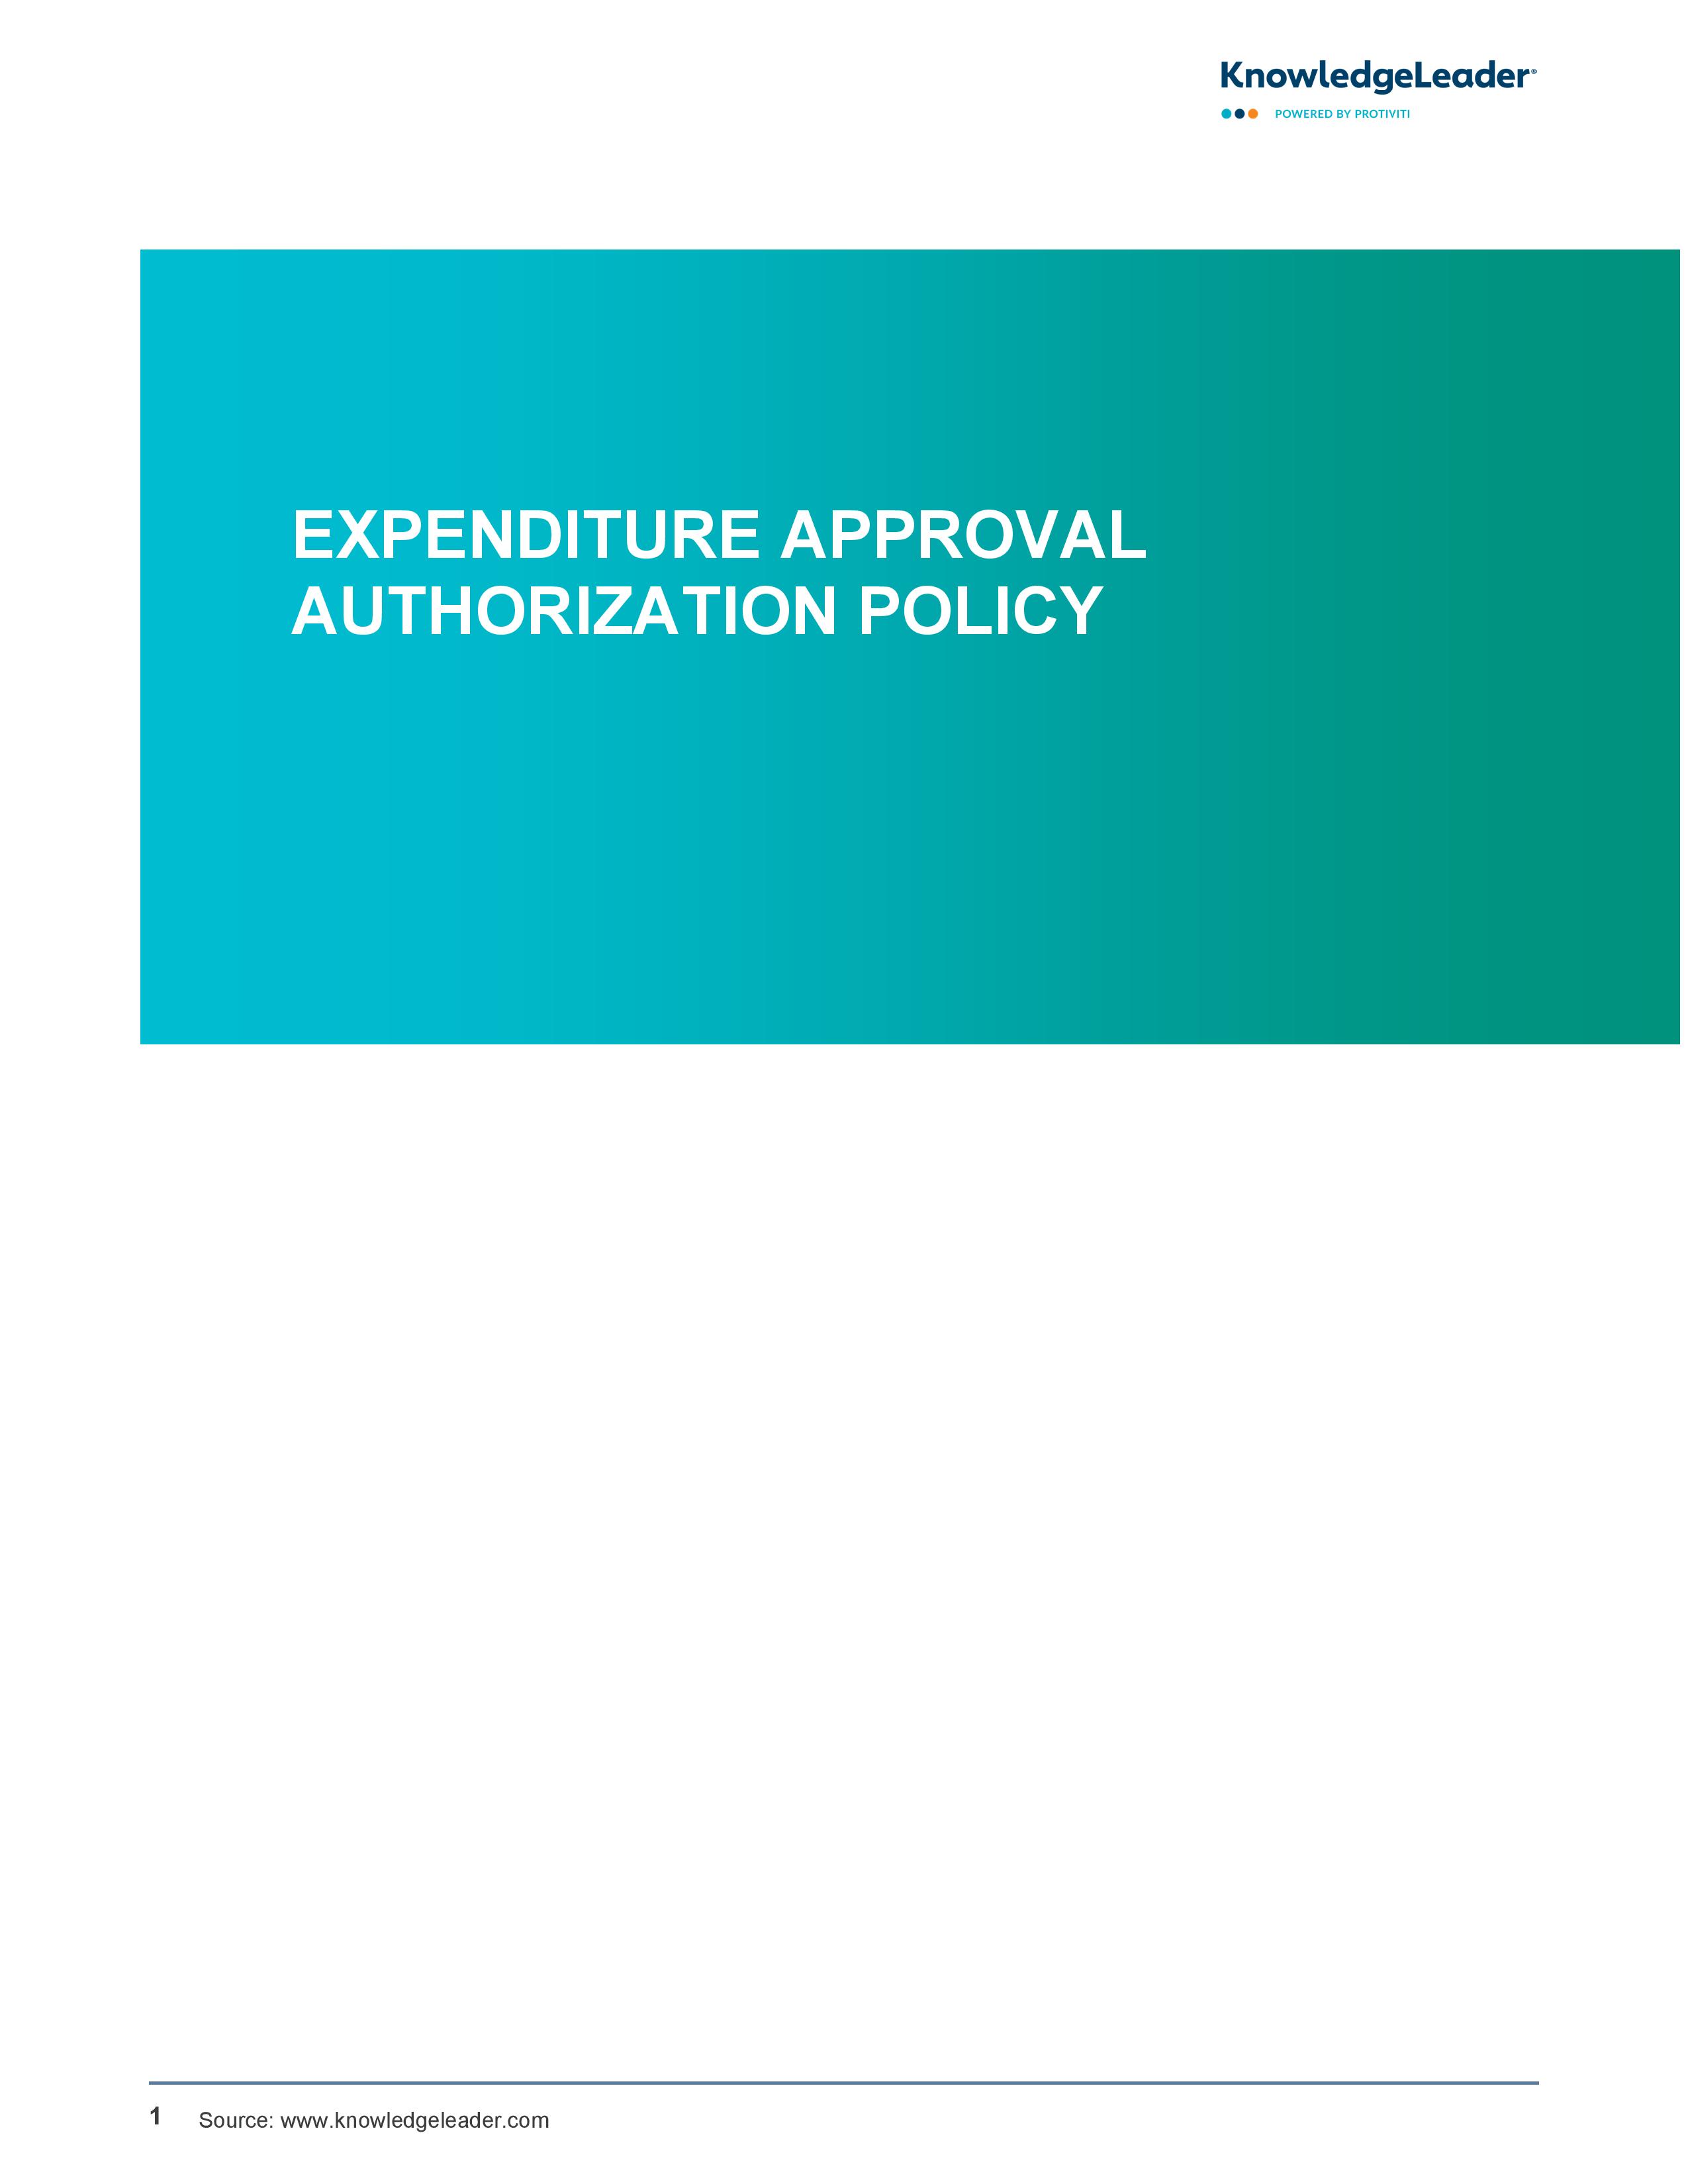 screenshot of the first page of Expenditure Approval Authorization Policy